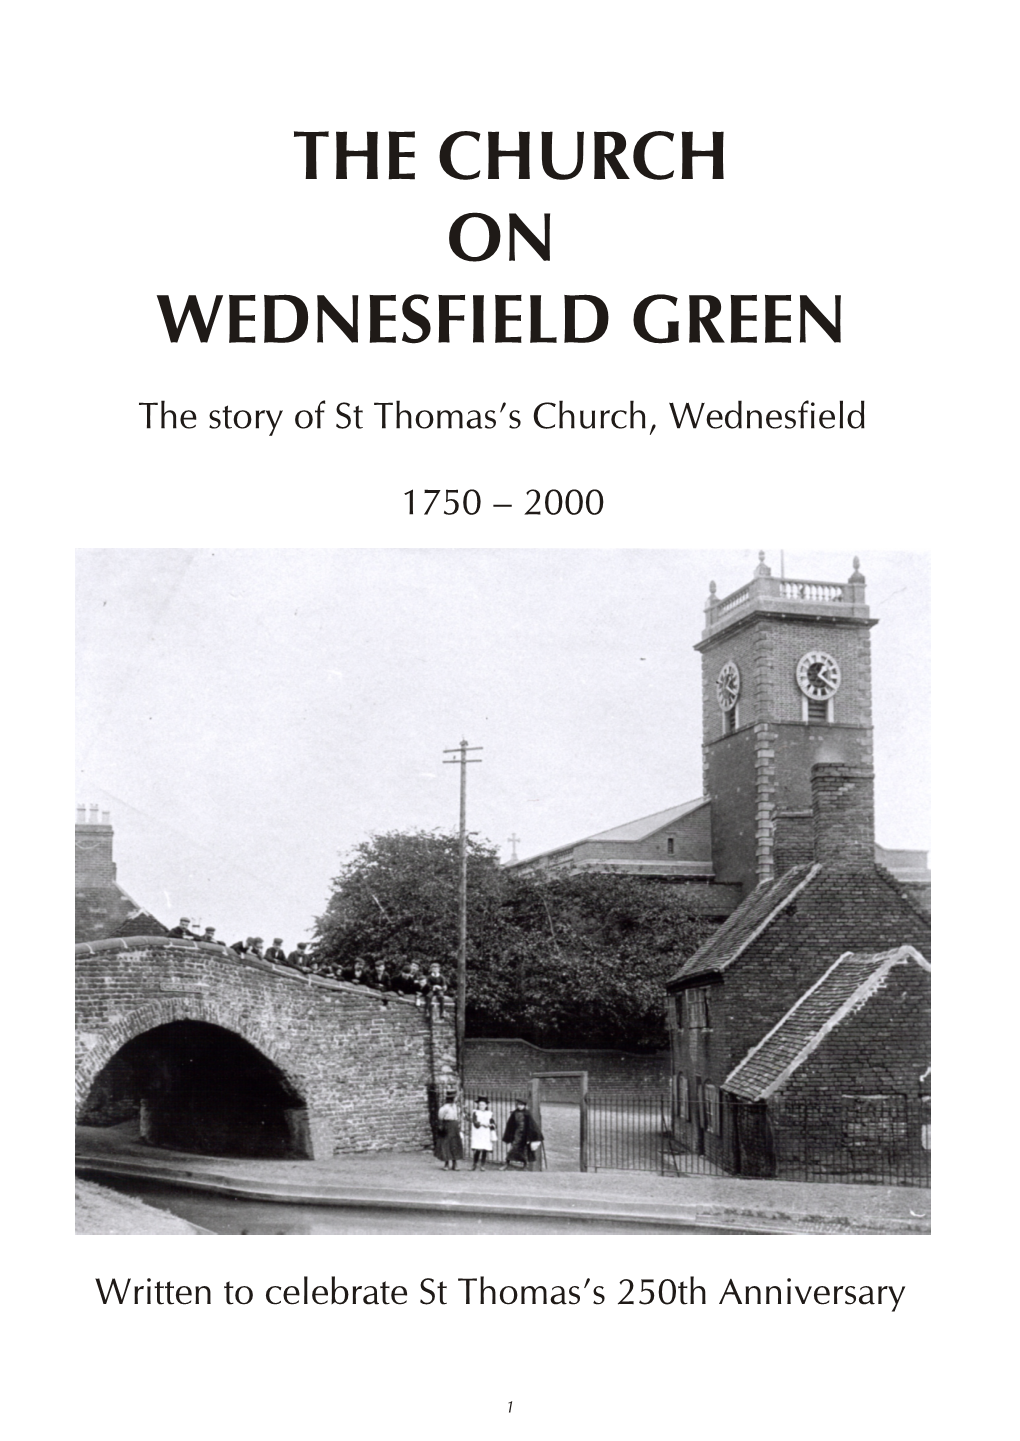 The Story of St Thomas's Church, Wednesfield 1750